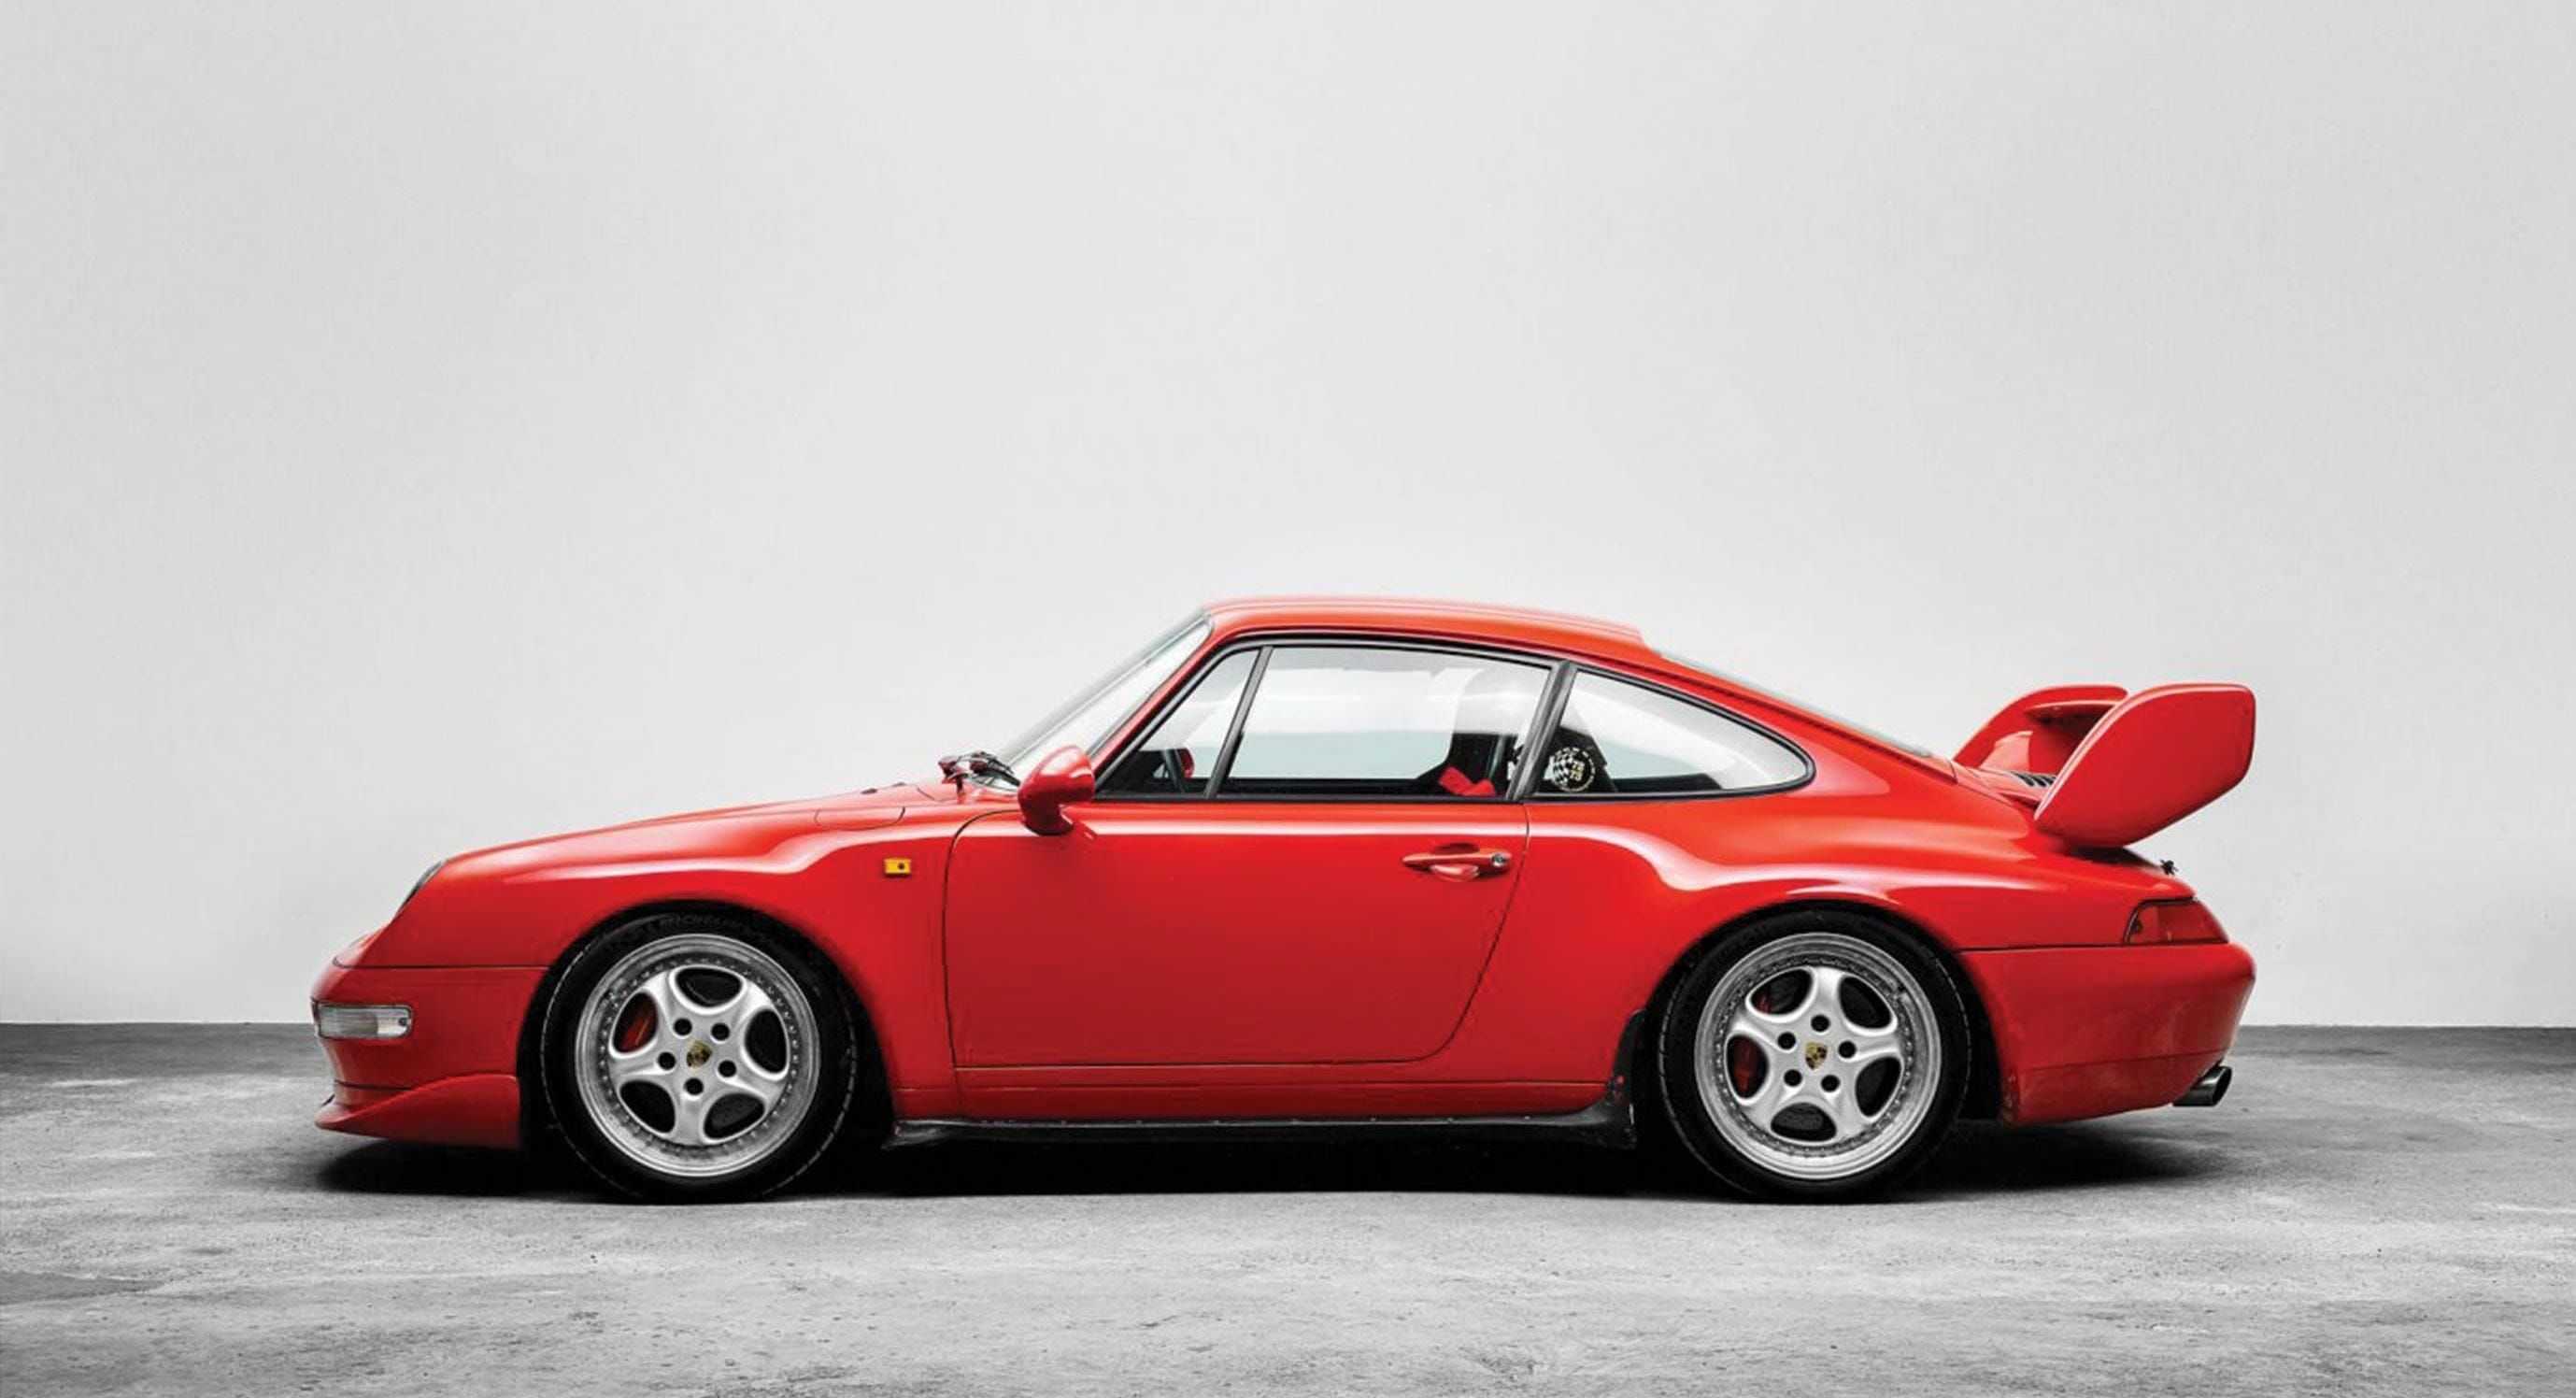 1995 Porsche 993: The iconic sports car designed for all ages.